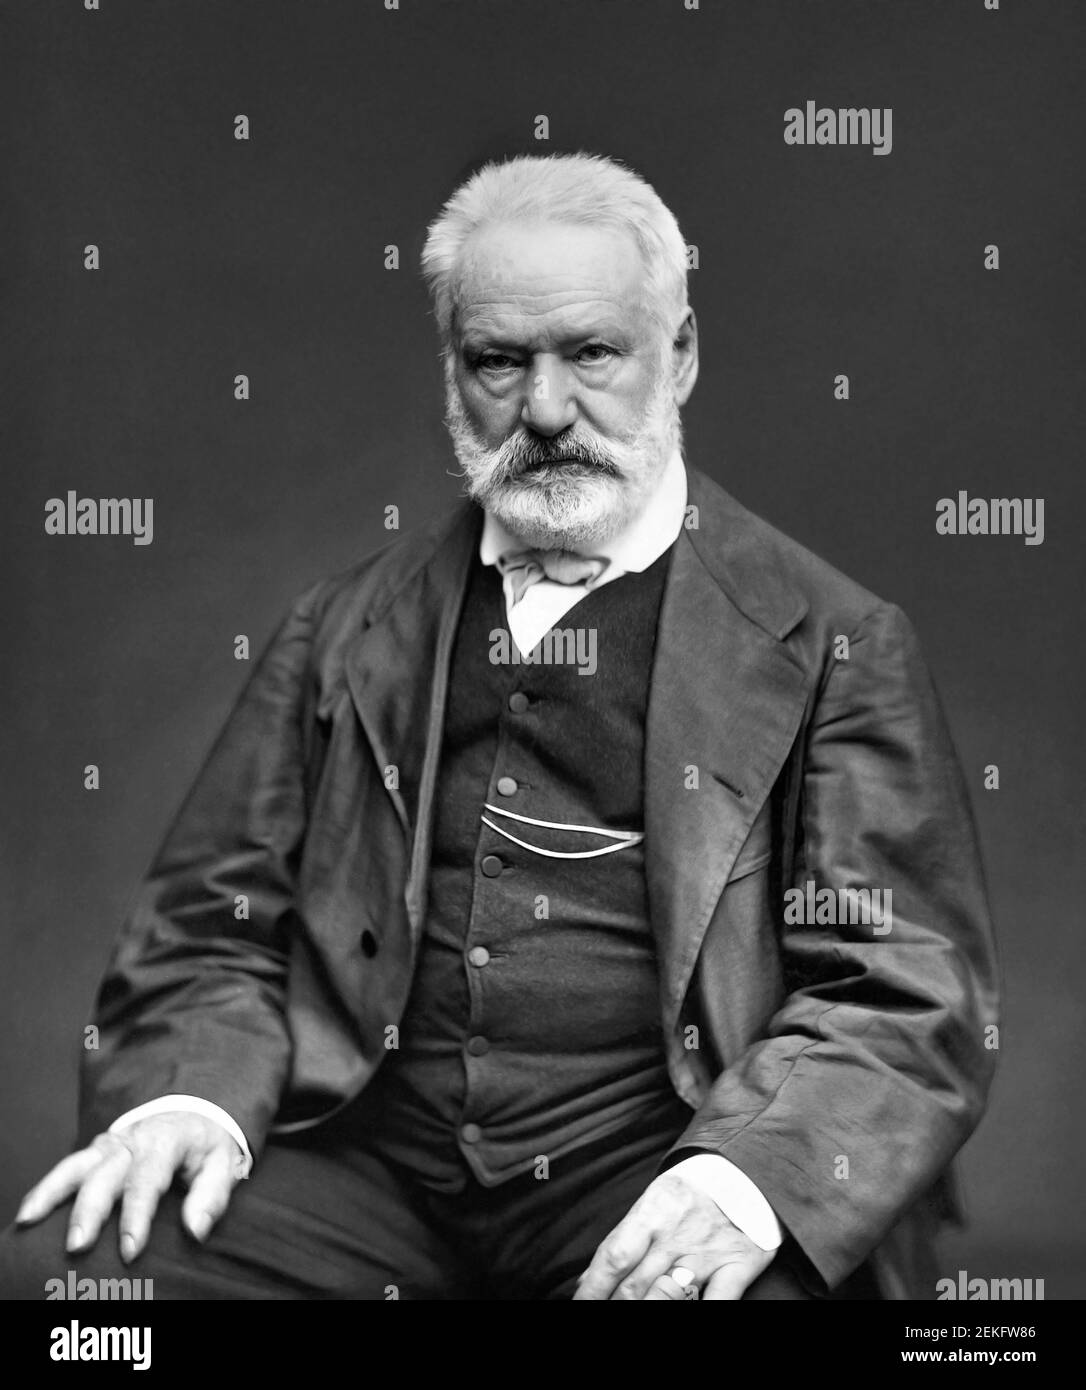 Victor Hugo. Portrait of the French poet, novelist and dramatist, Victor Marie Hugo (1802-1885). Photo by Étienne Carjat, 1876 Stock Photo